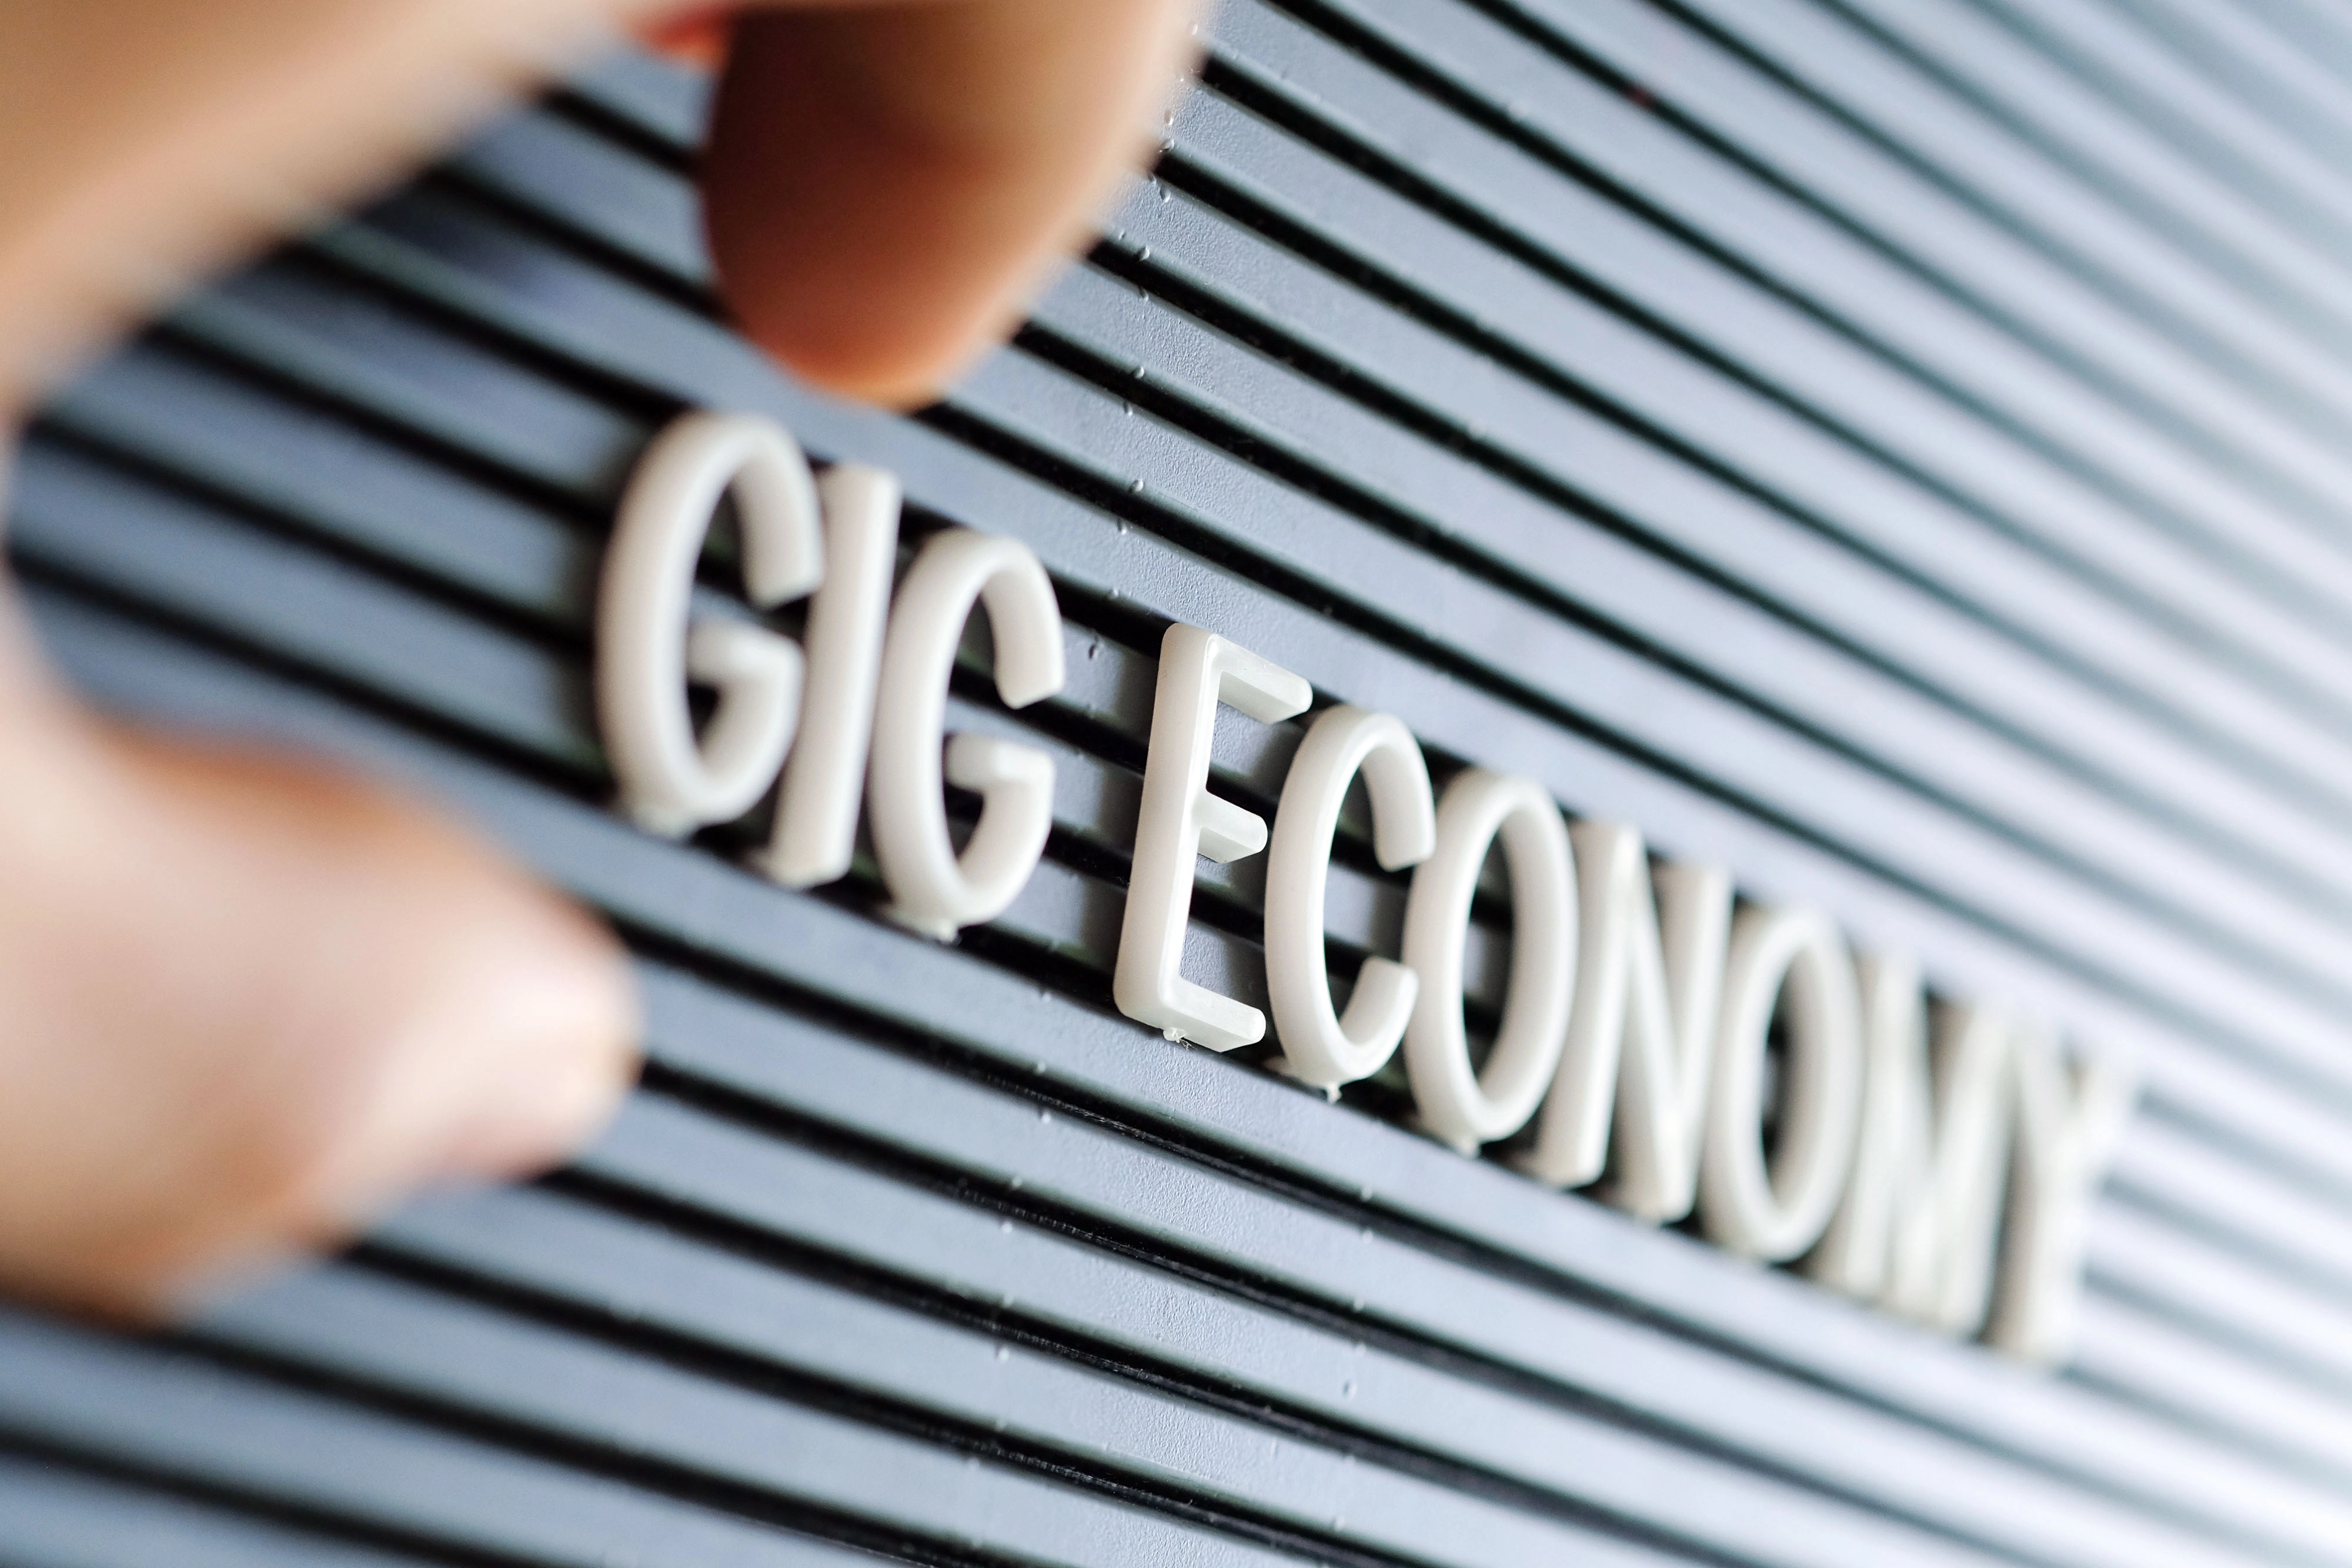 TOP 20 investment opportunities in the gig economy